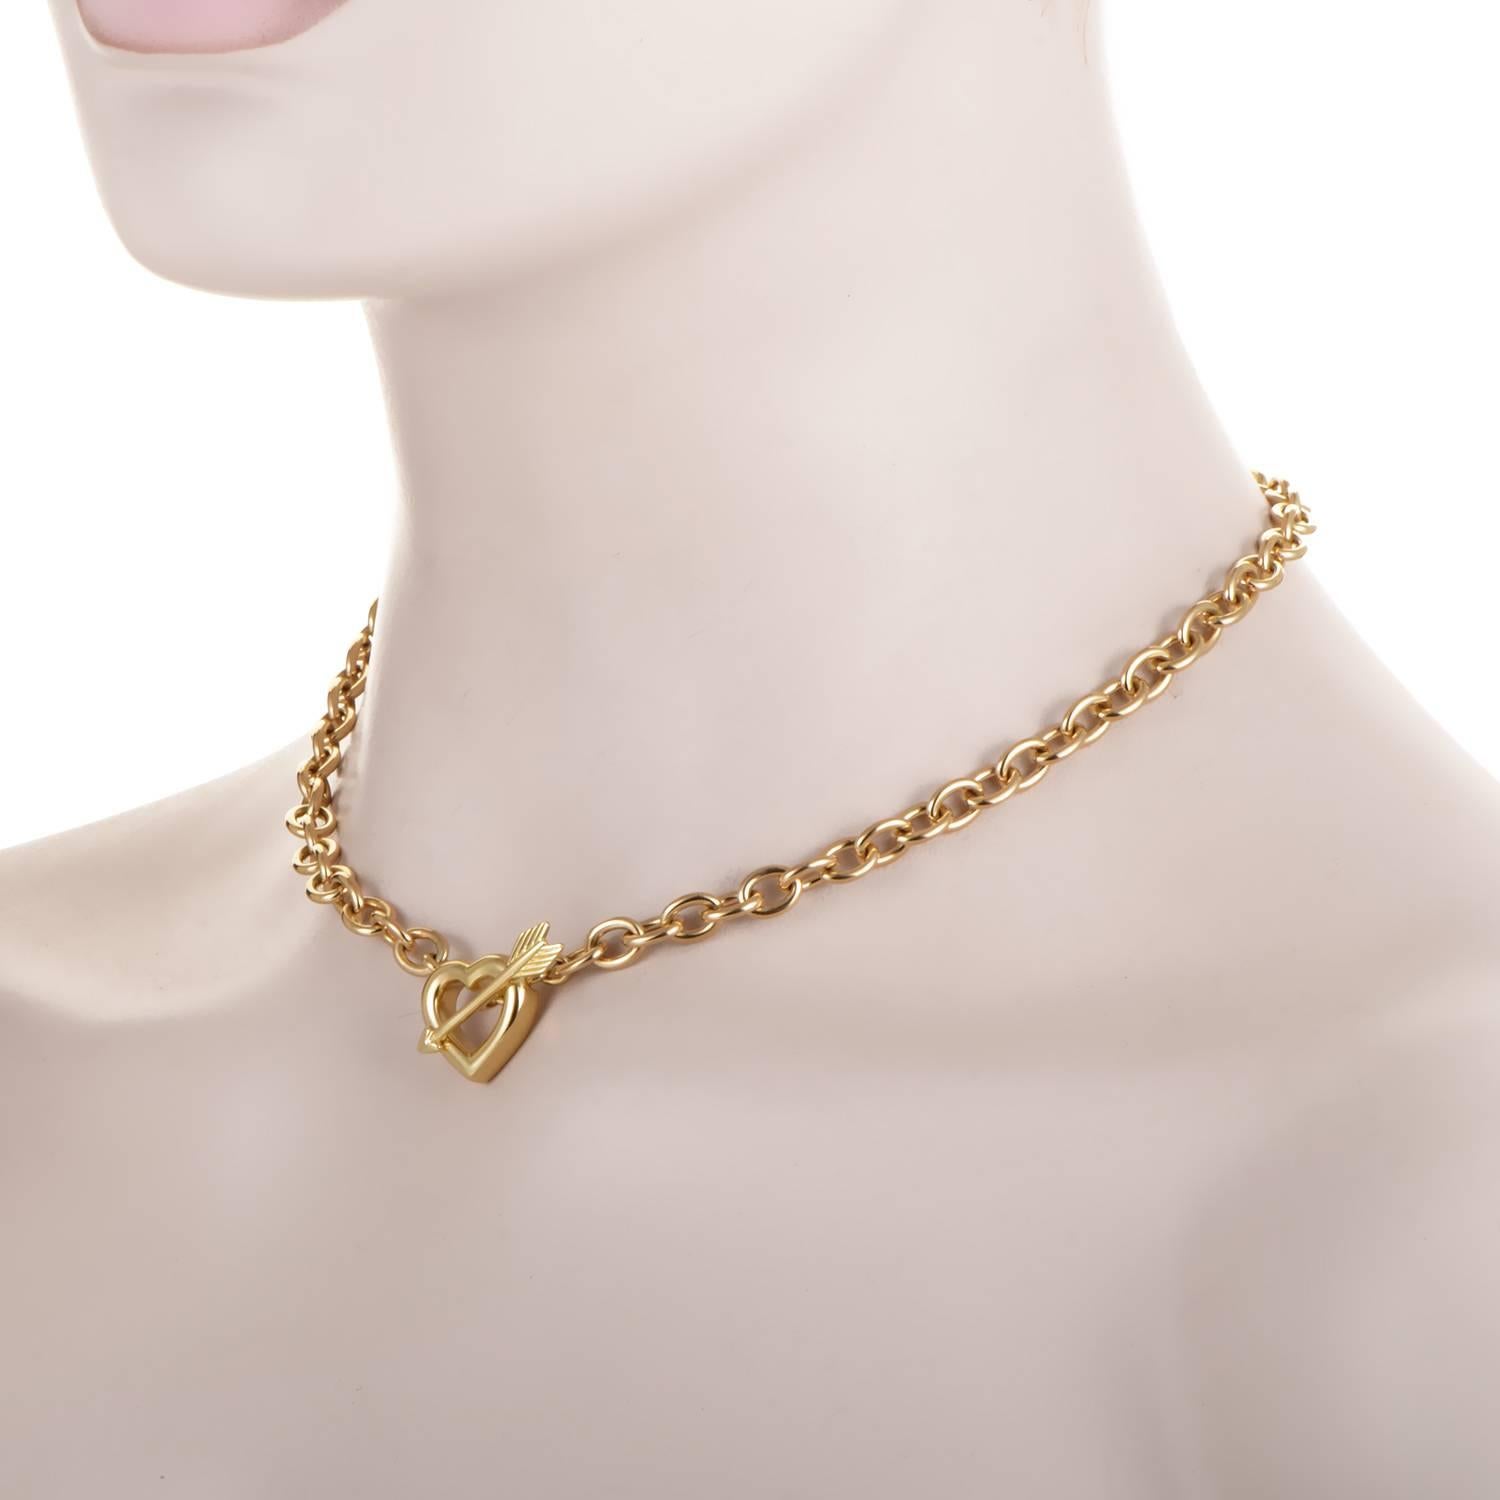 This stylish design from Tiffany & Co. will never go out of style! The necklace is made of 18K yellow gold and boasts a toggle clasp fashioned from a heart and arrow.
Included Items: Manufacturer's Box
